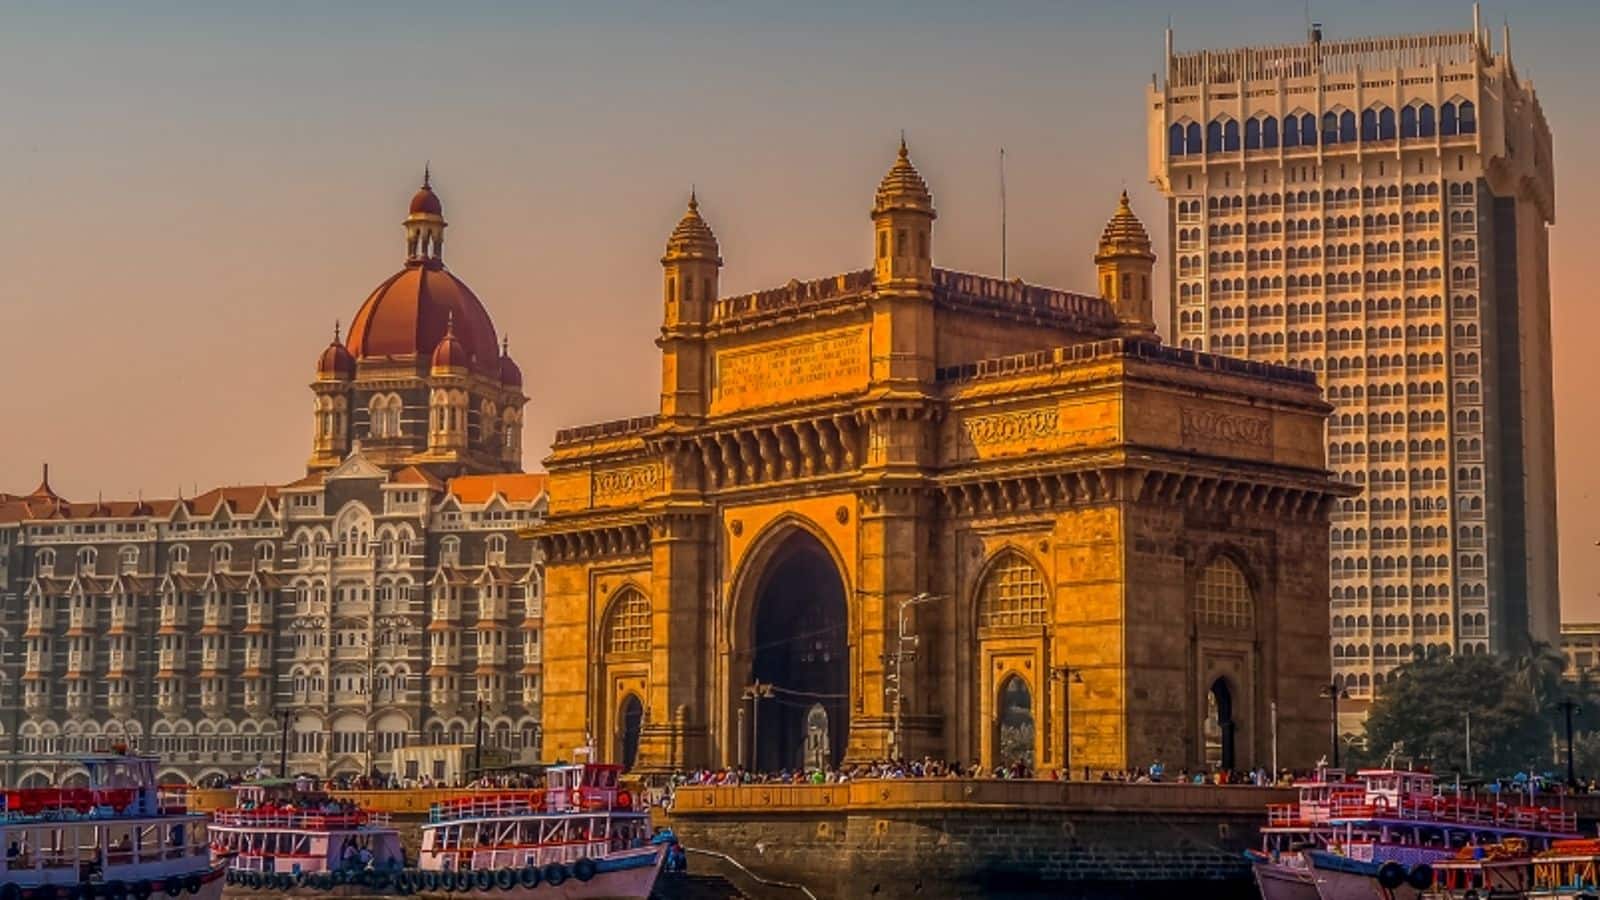 Add Mumbai's colonial architecture gems to your itinerary